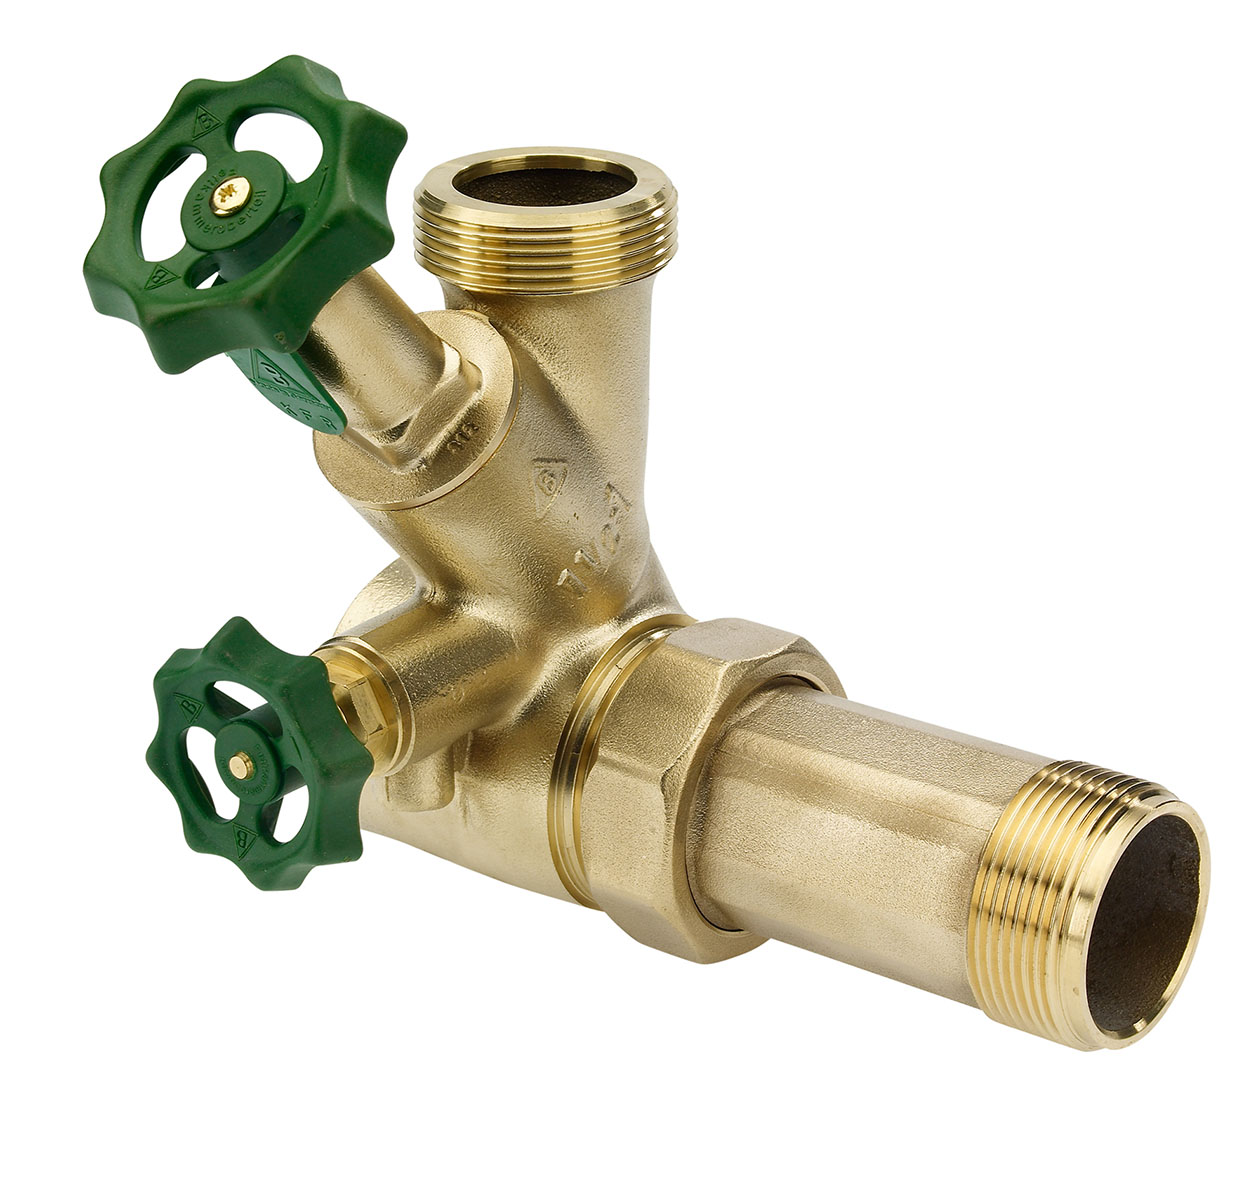 4031000 - CR-Brass Branch T-Valve Combined Free-flow and Backflow-preventer Body DN 50